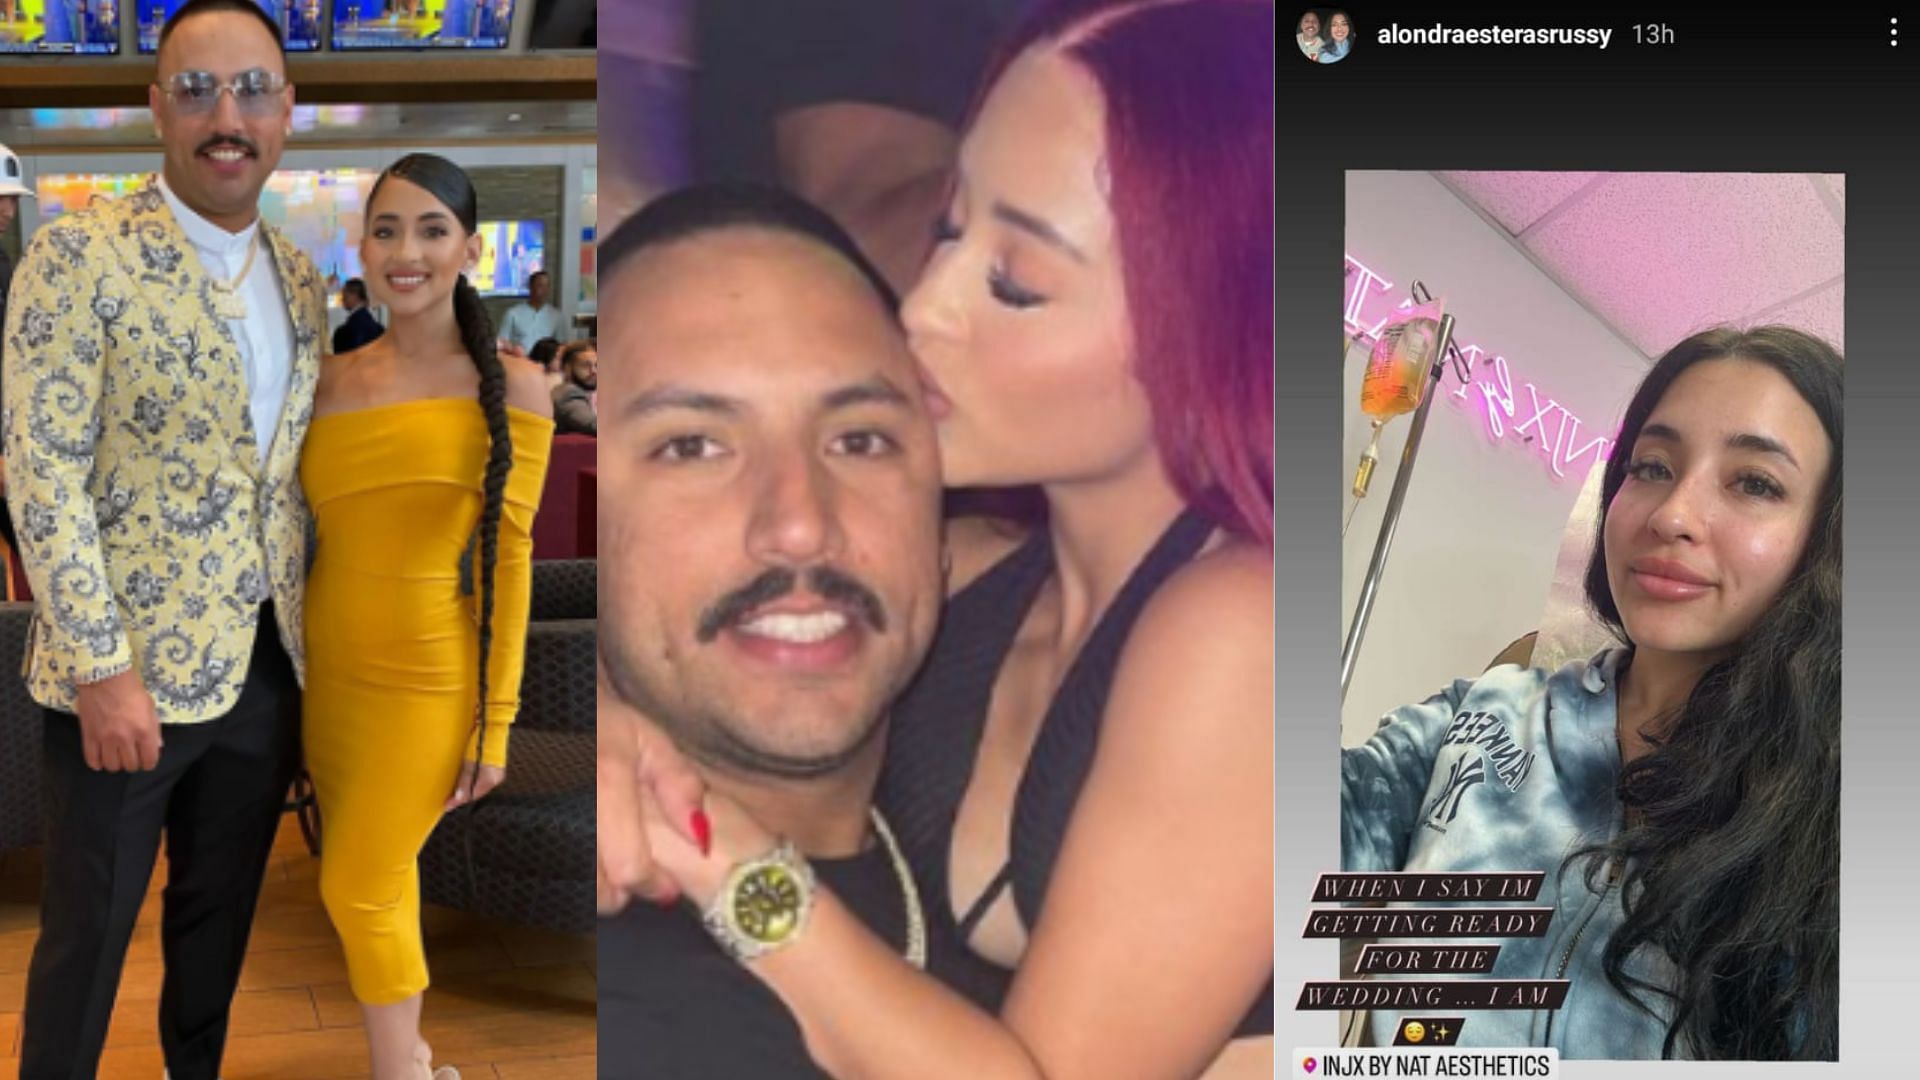 Yankees' Nestor Cortes Proposed to GF Alondra Esteras Russy After 2022 MLB  ASG, News, Scores, Highlights, Stats, and Rumors